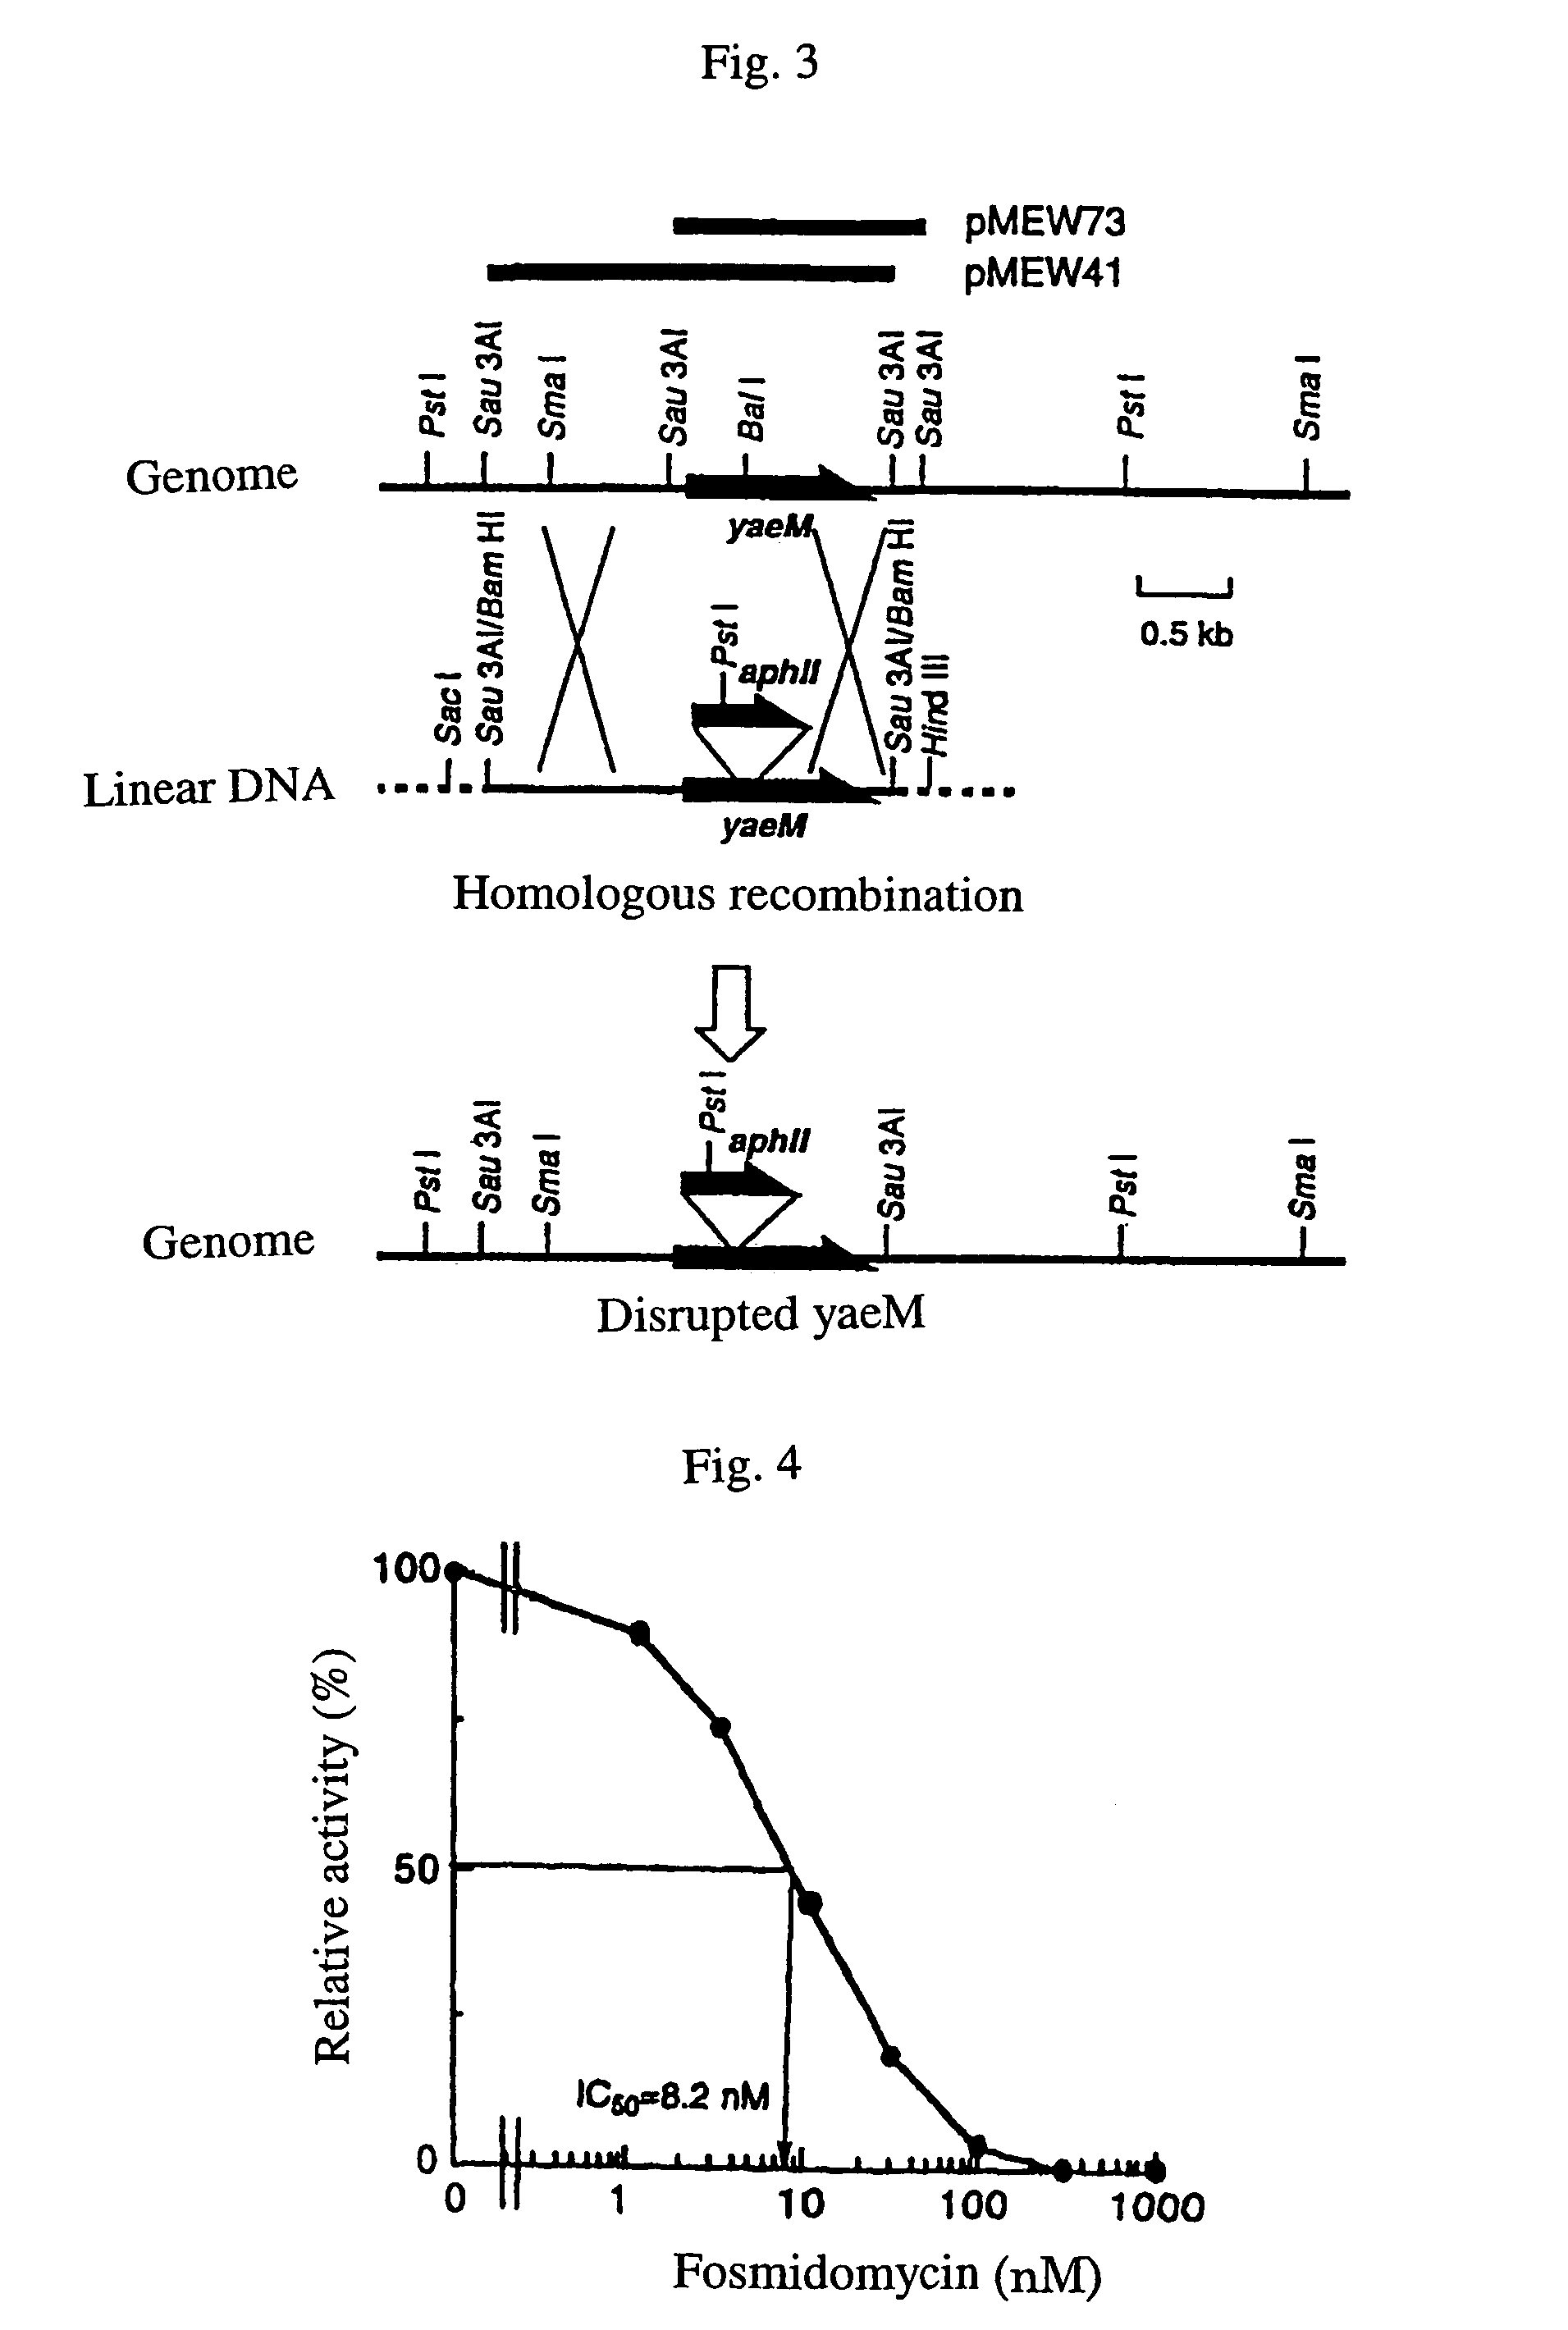 Process for producing isoprenoid compounds by microorganisms and a method for screening compounds with antibiotic or weeding activity